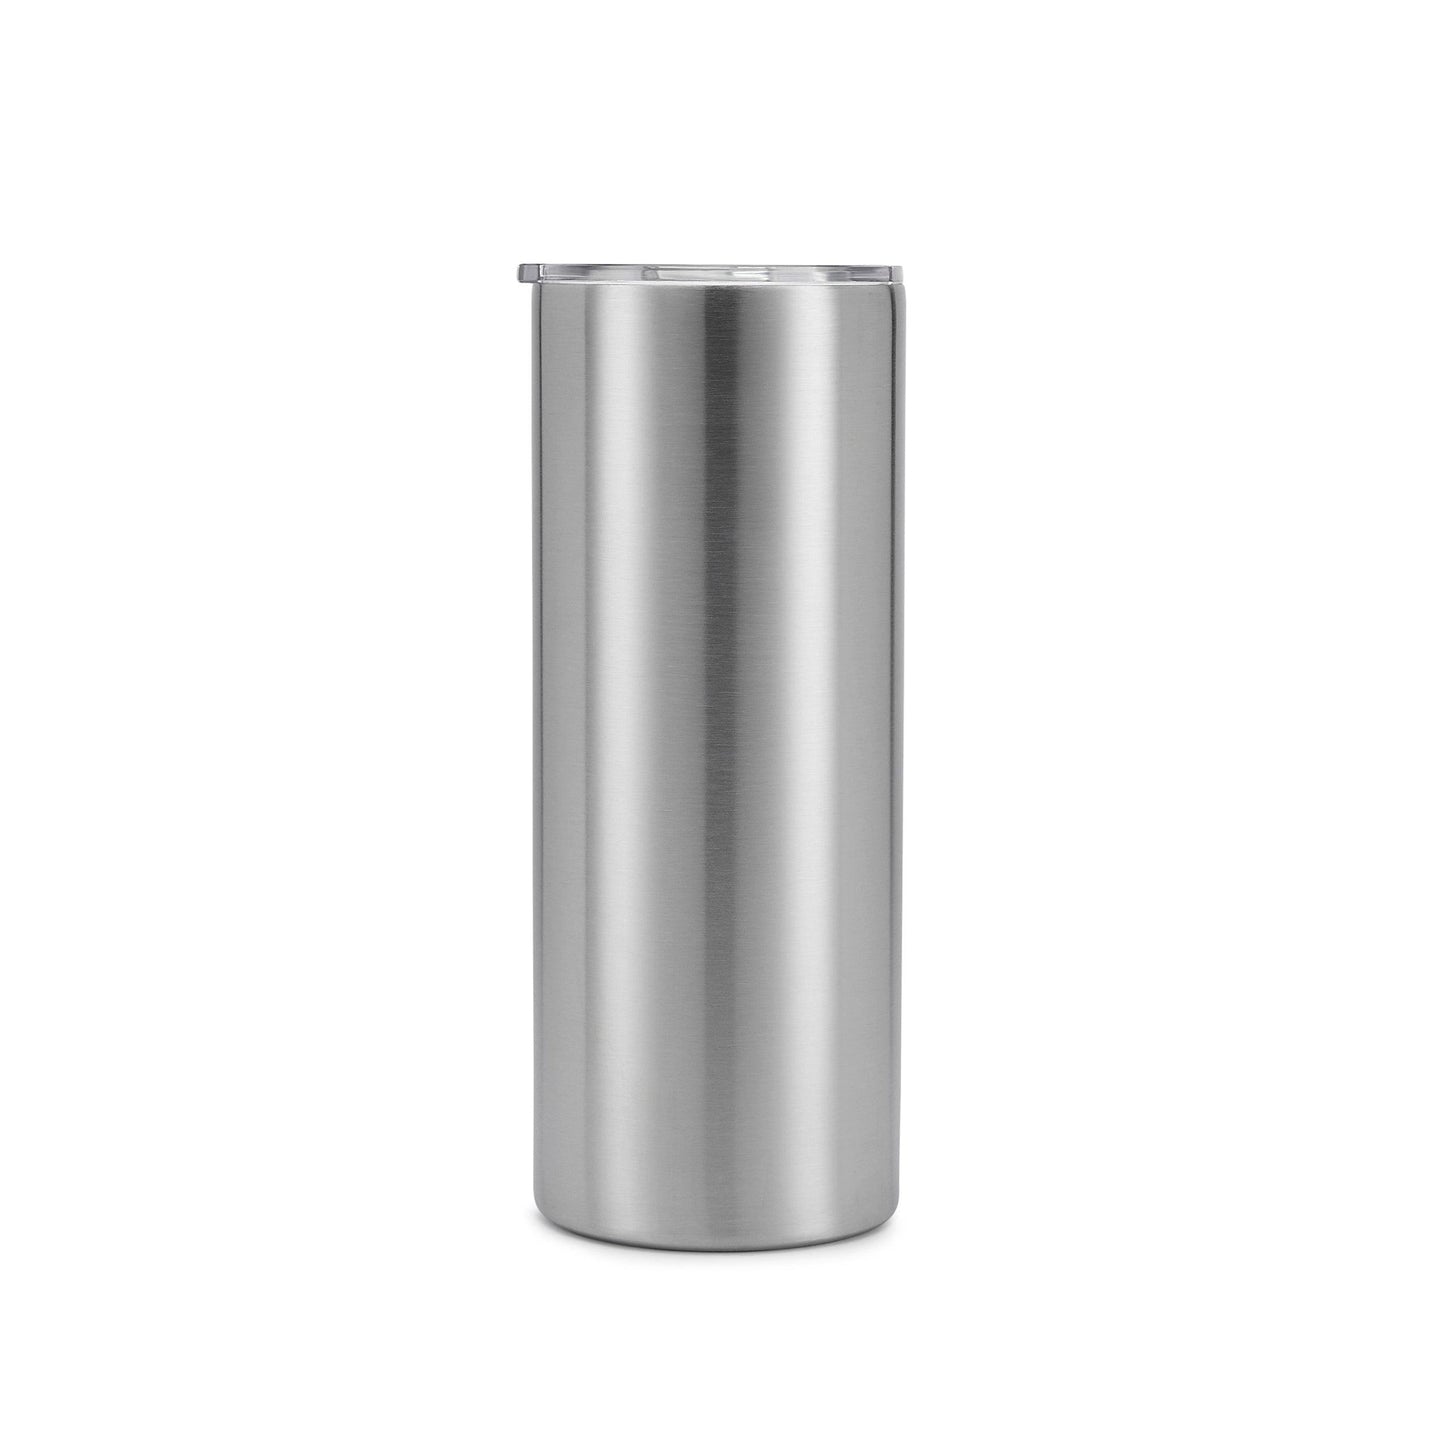 MakerFlo Crafts Curve Tumbler, Stainless Steel, Case of 25, 30oz